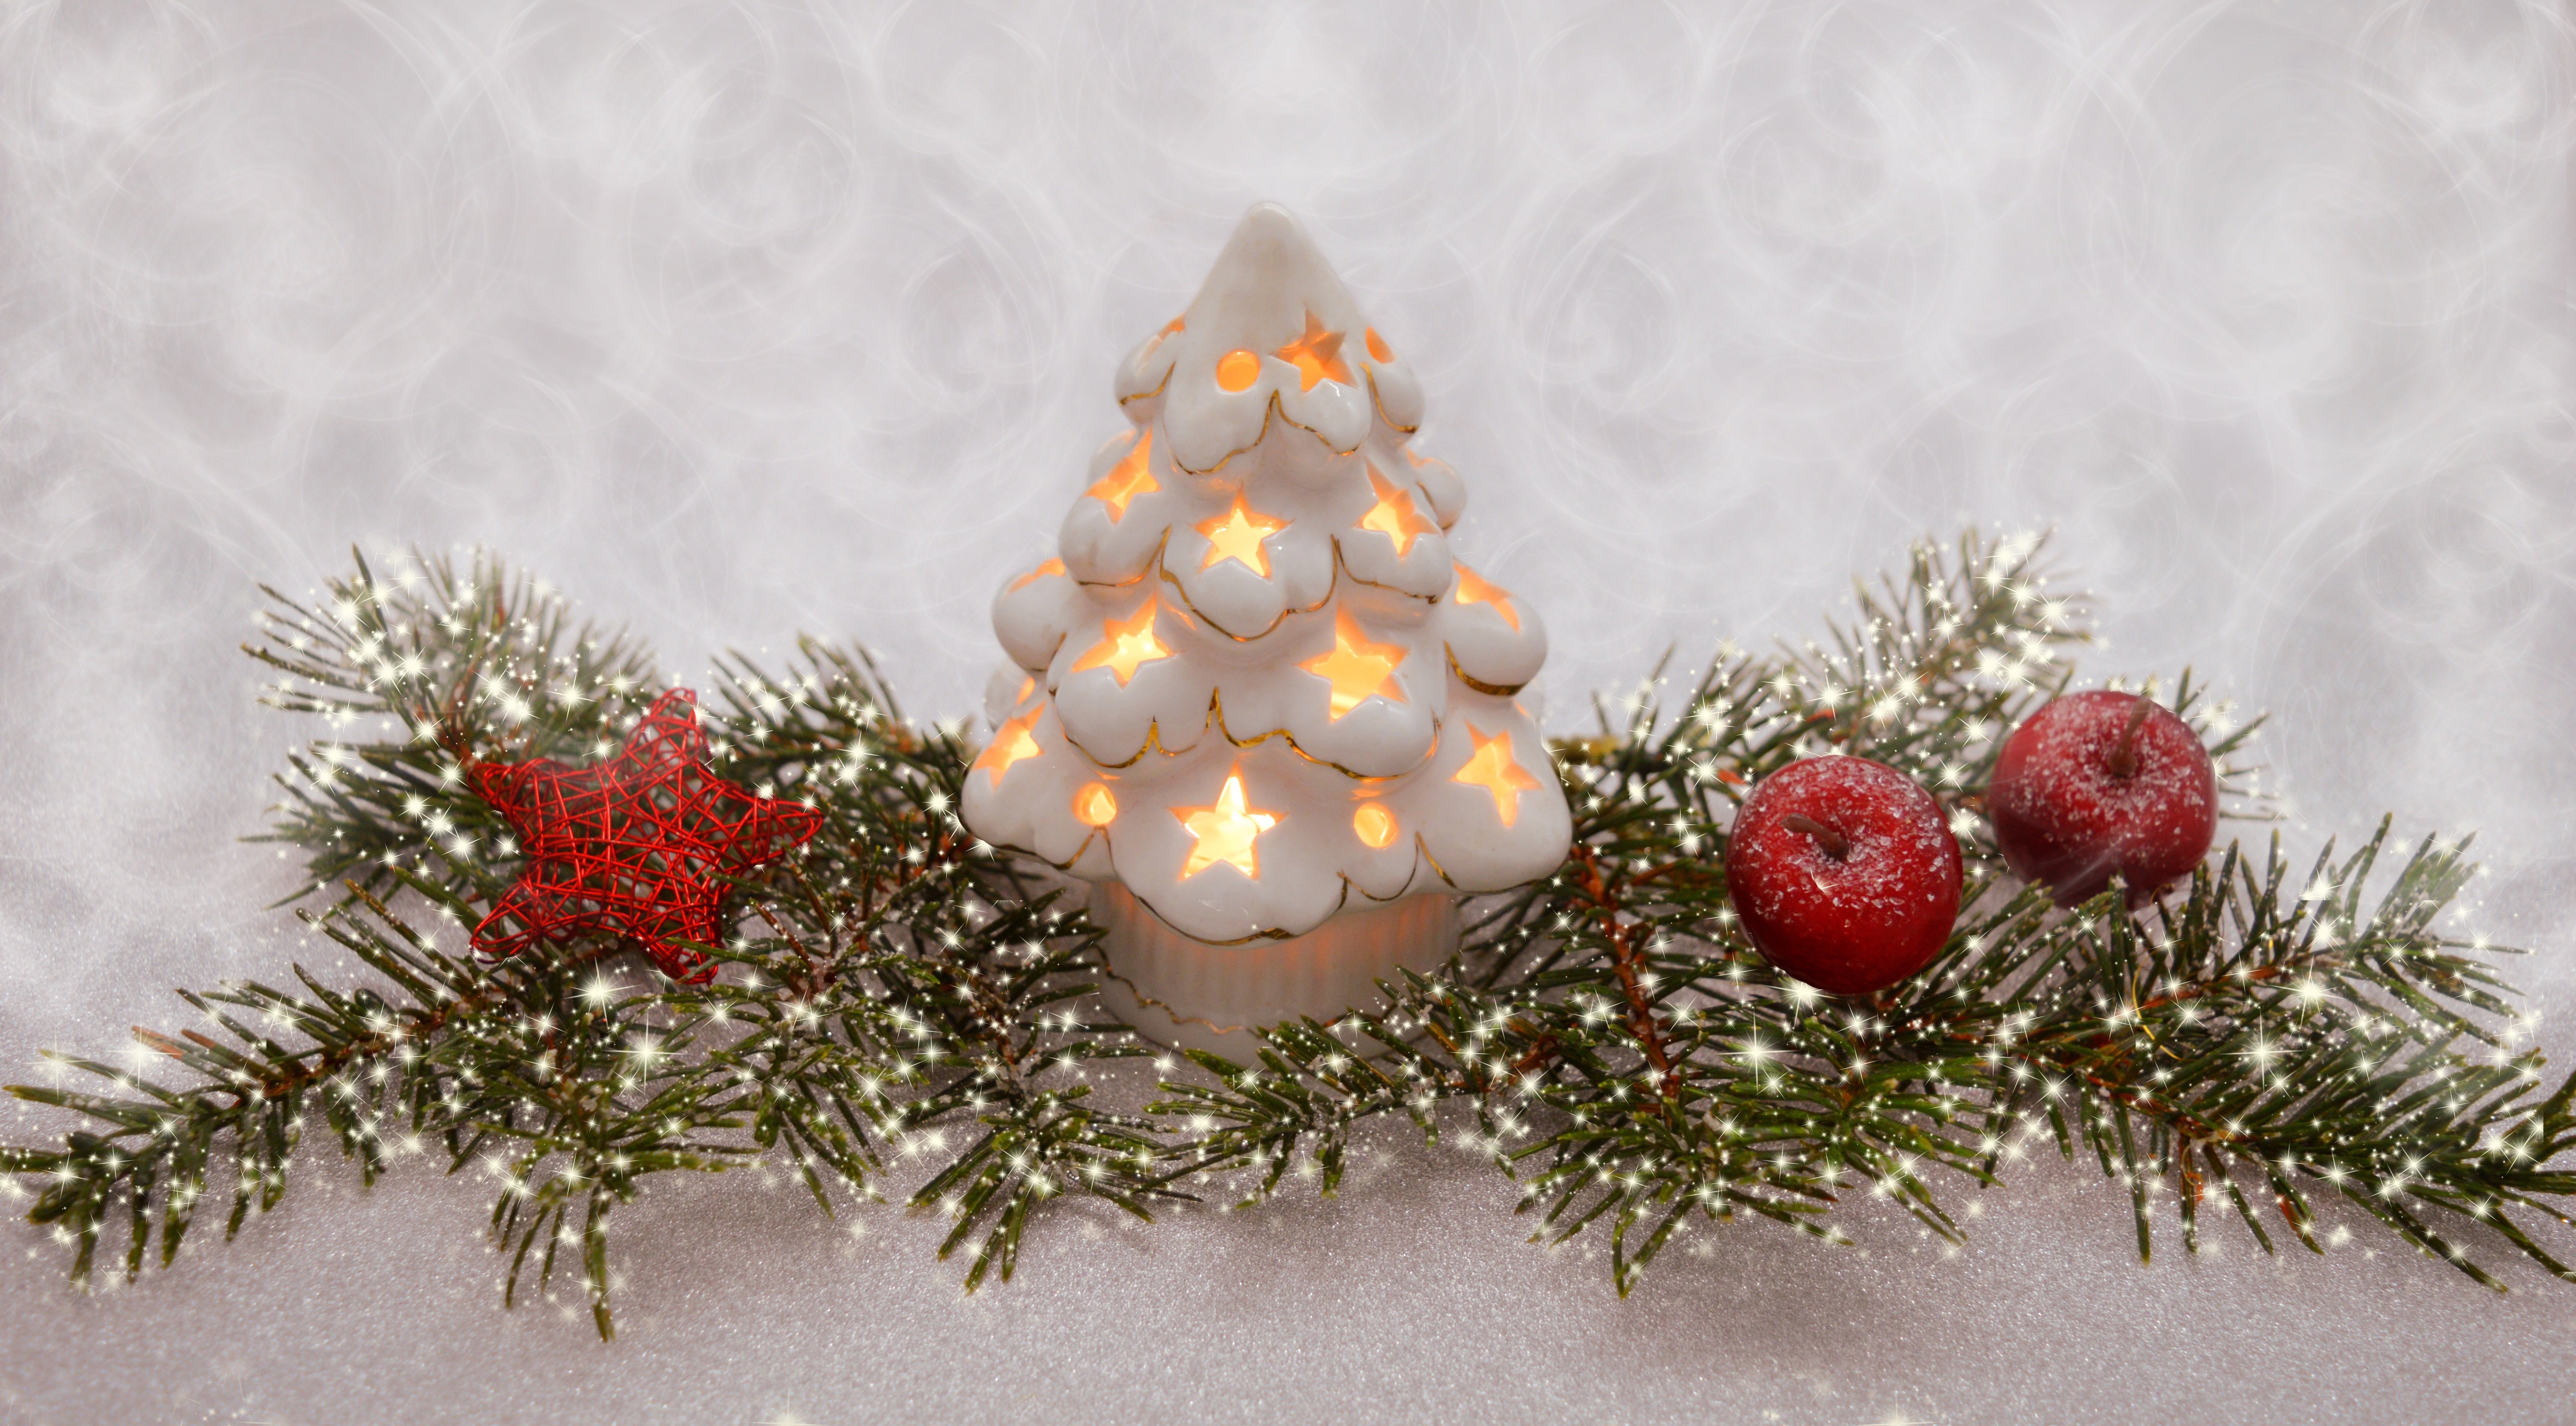 Candle Christmas Decoration 6012x3328